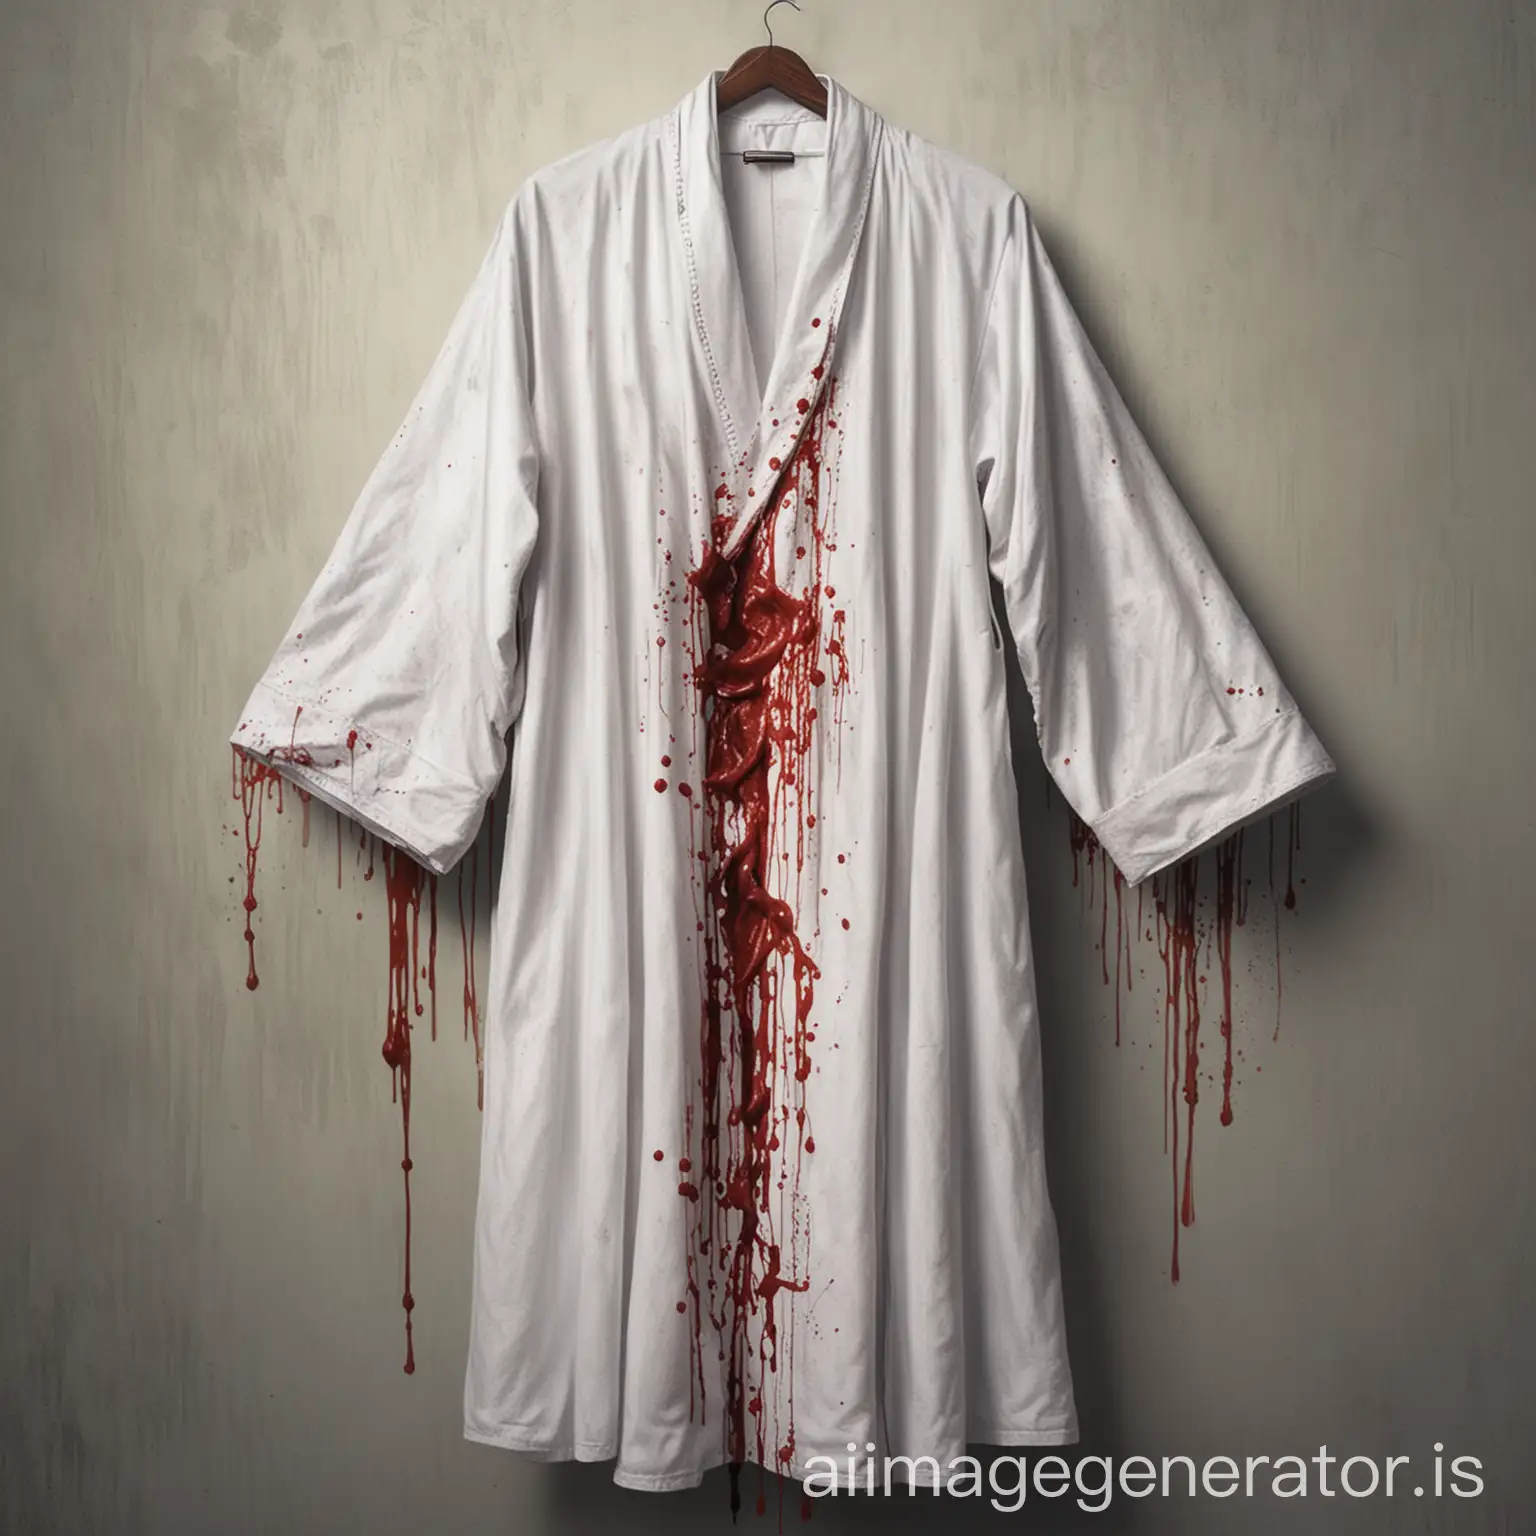 bright, white robe stained in blood